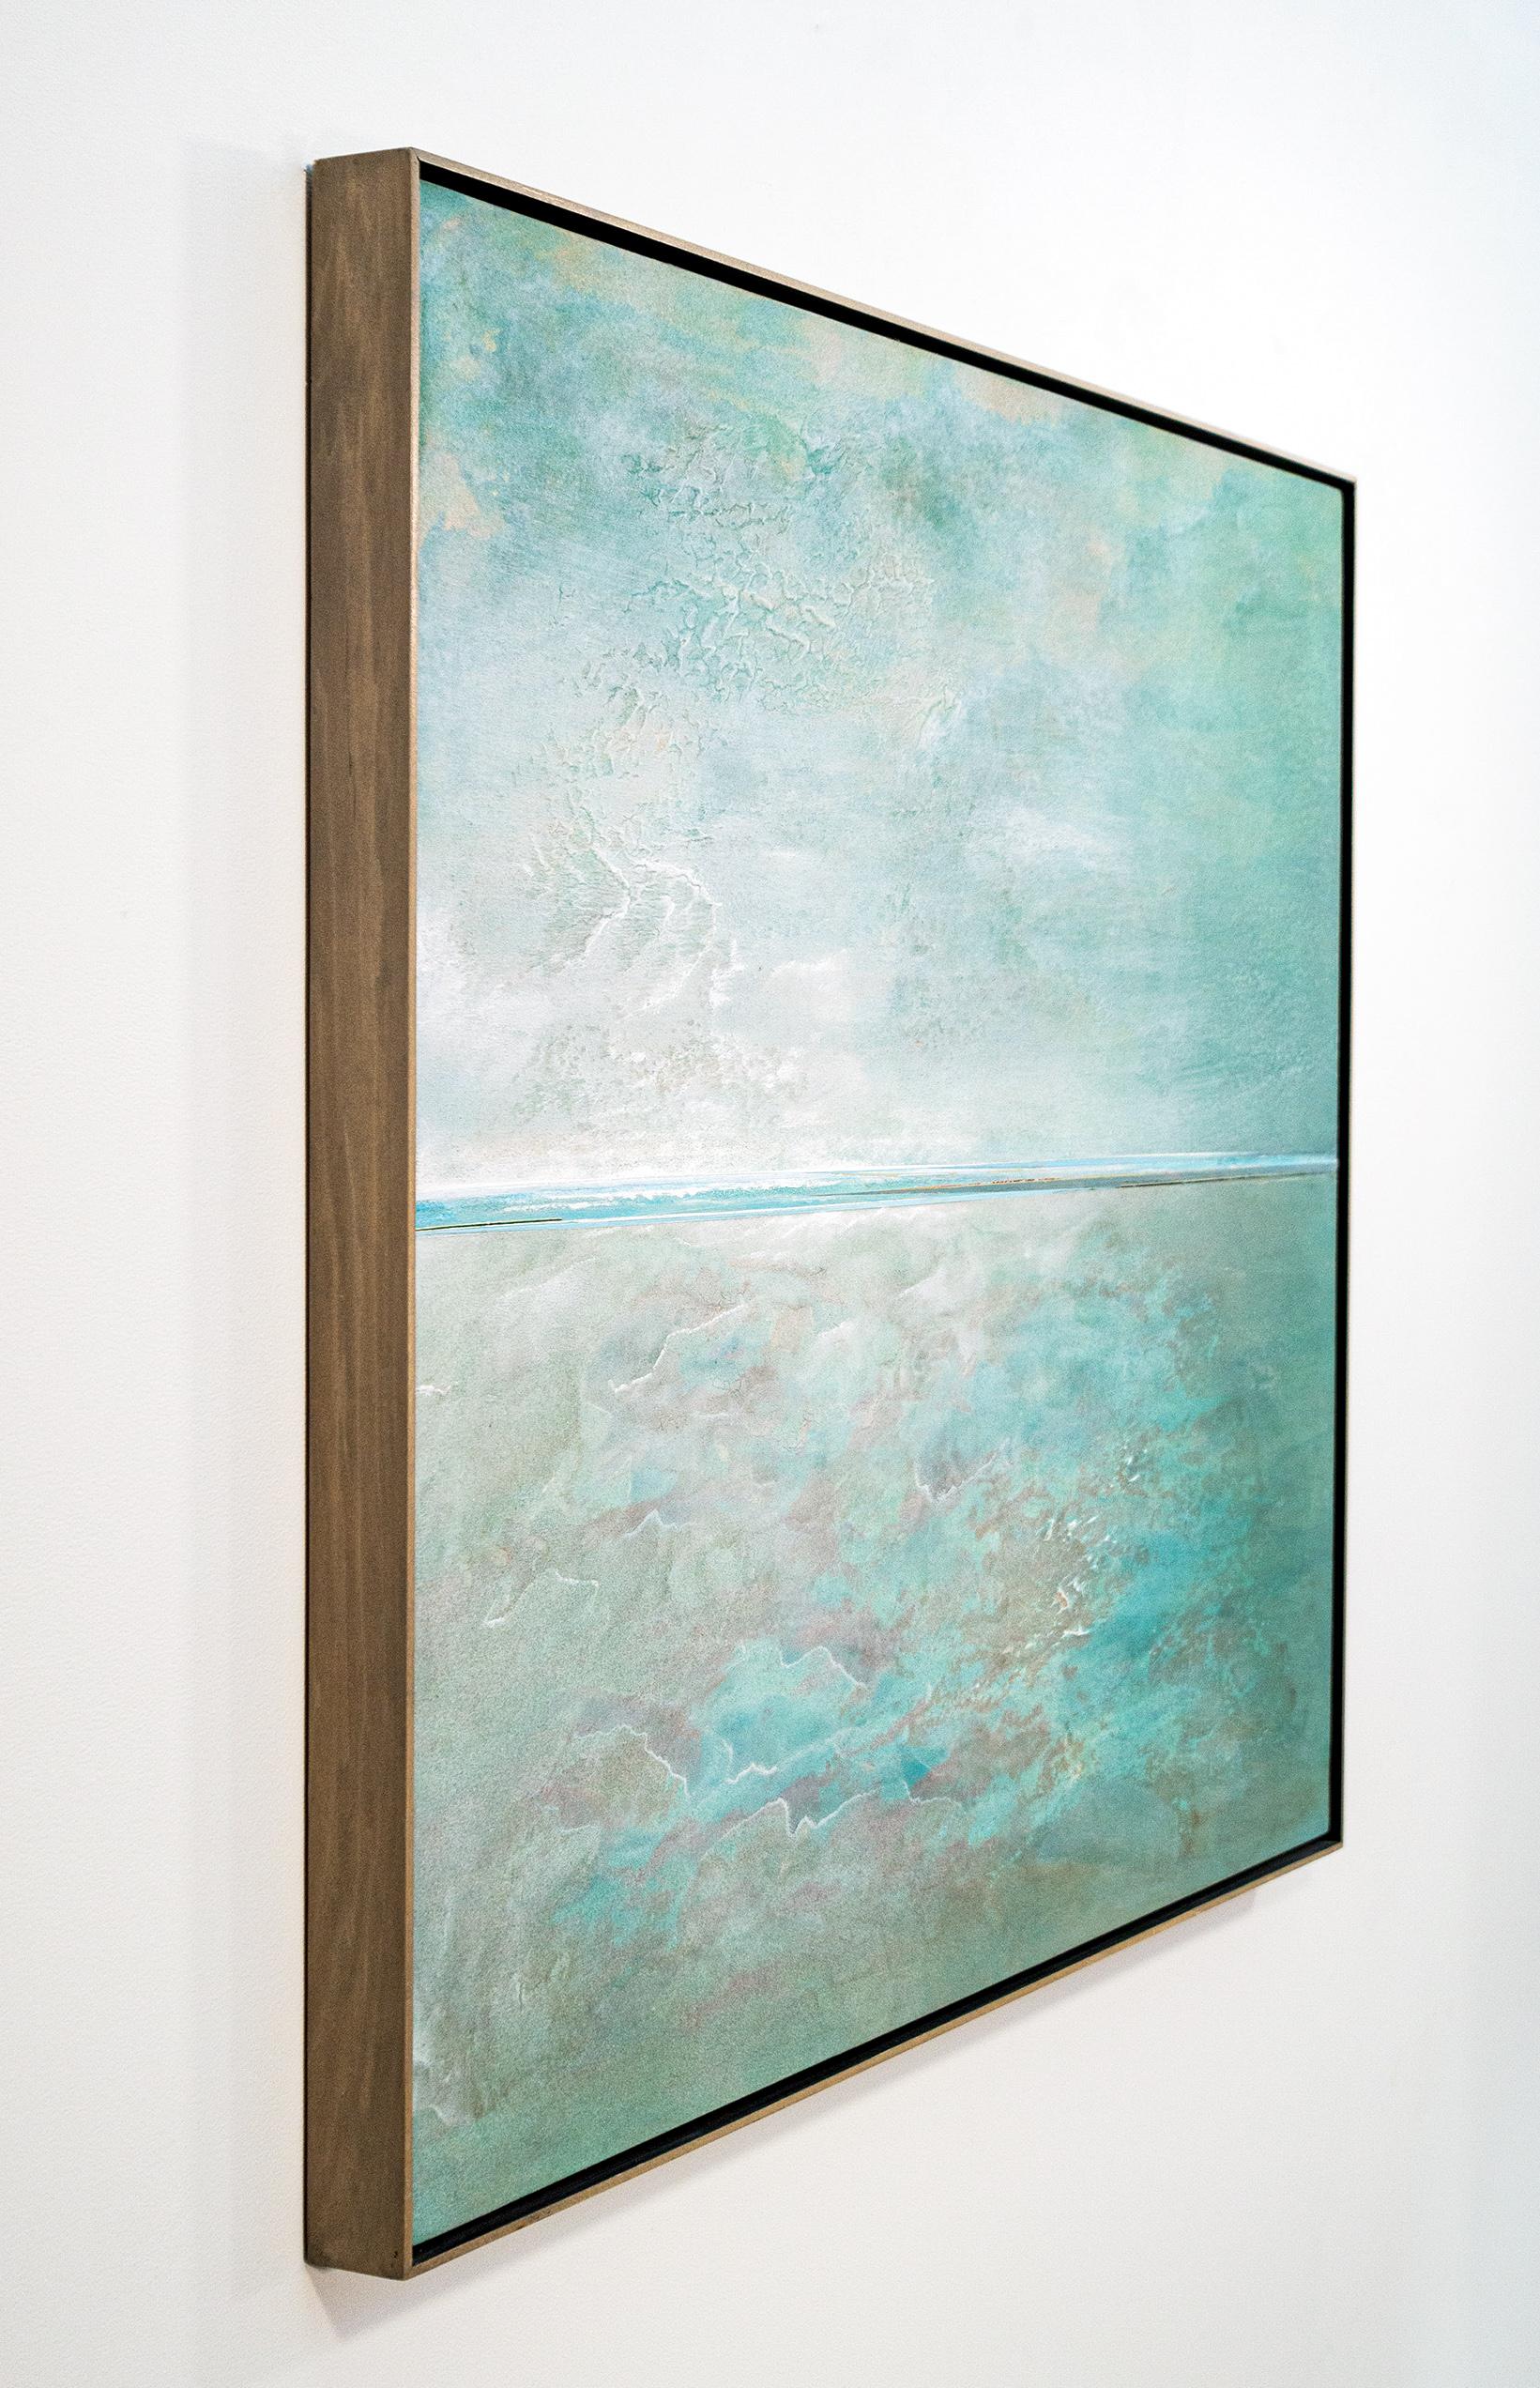 Canadian artist Sasha Rogers’ lyrical, luminous artwork can be found in collections internationally. Inspired by the beauty of the natural world, Rogers has been drawn to expressing the idea of a ‘horizon line’ that separates the colour field of her